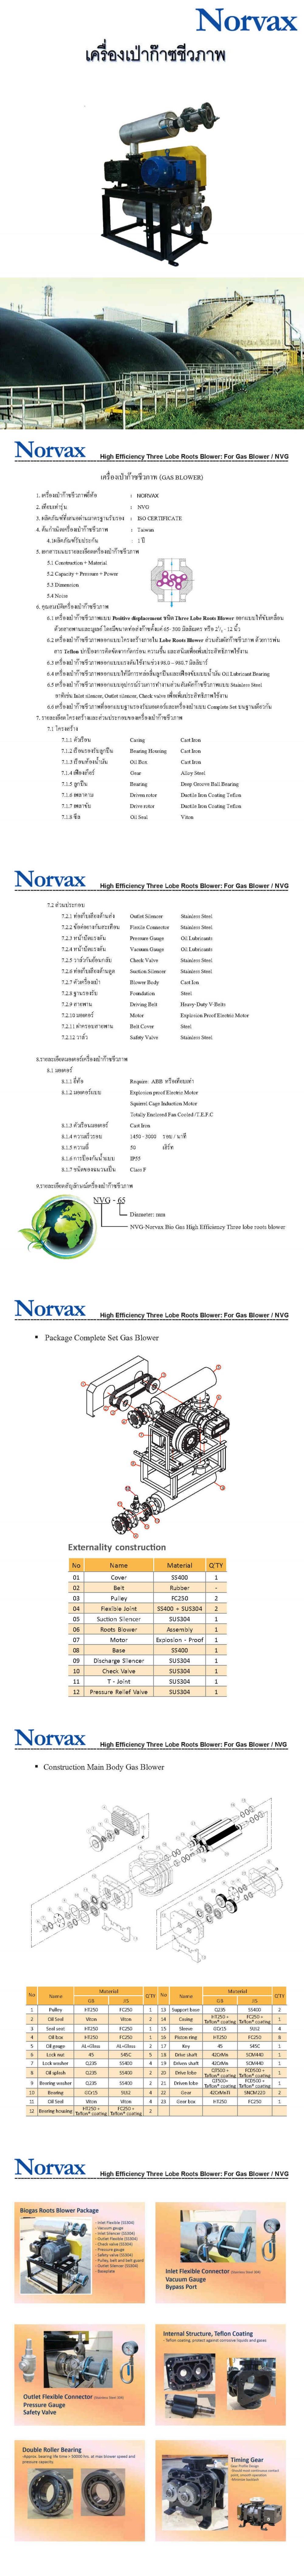 Norvax Root Blower for Biogas